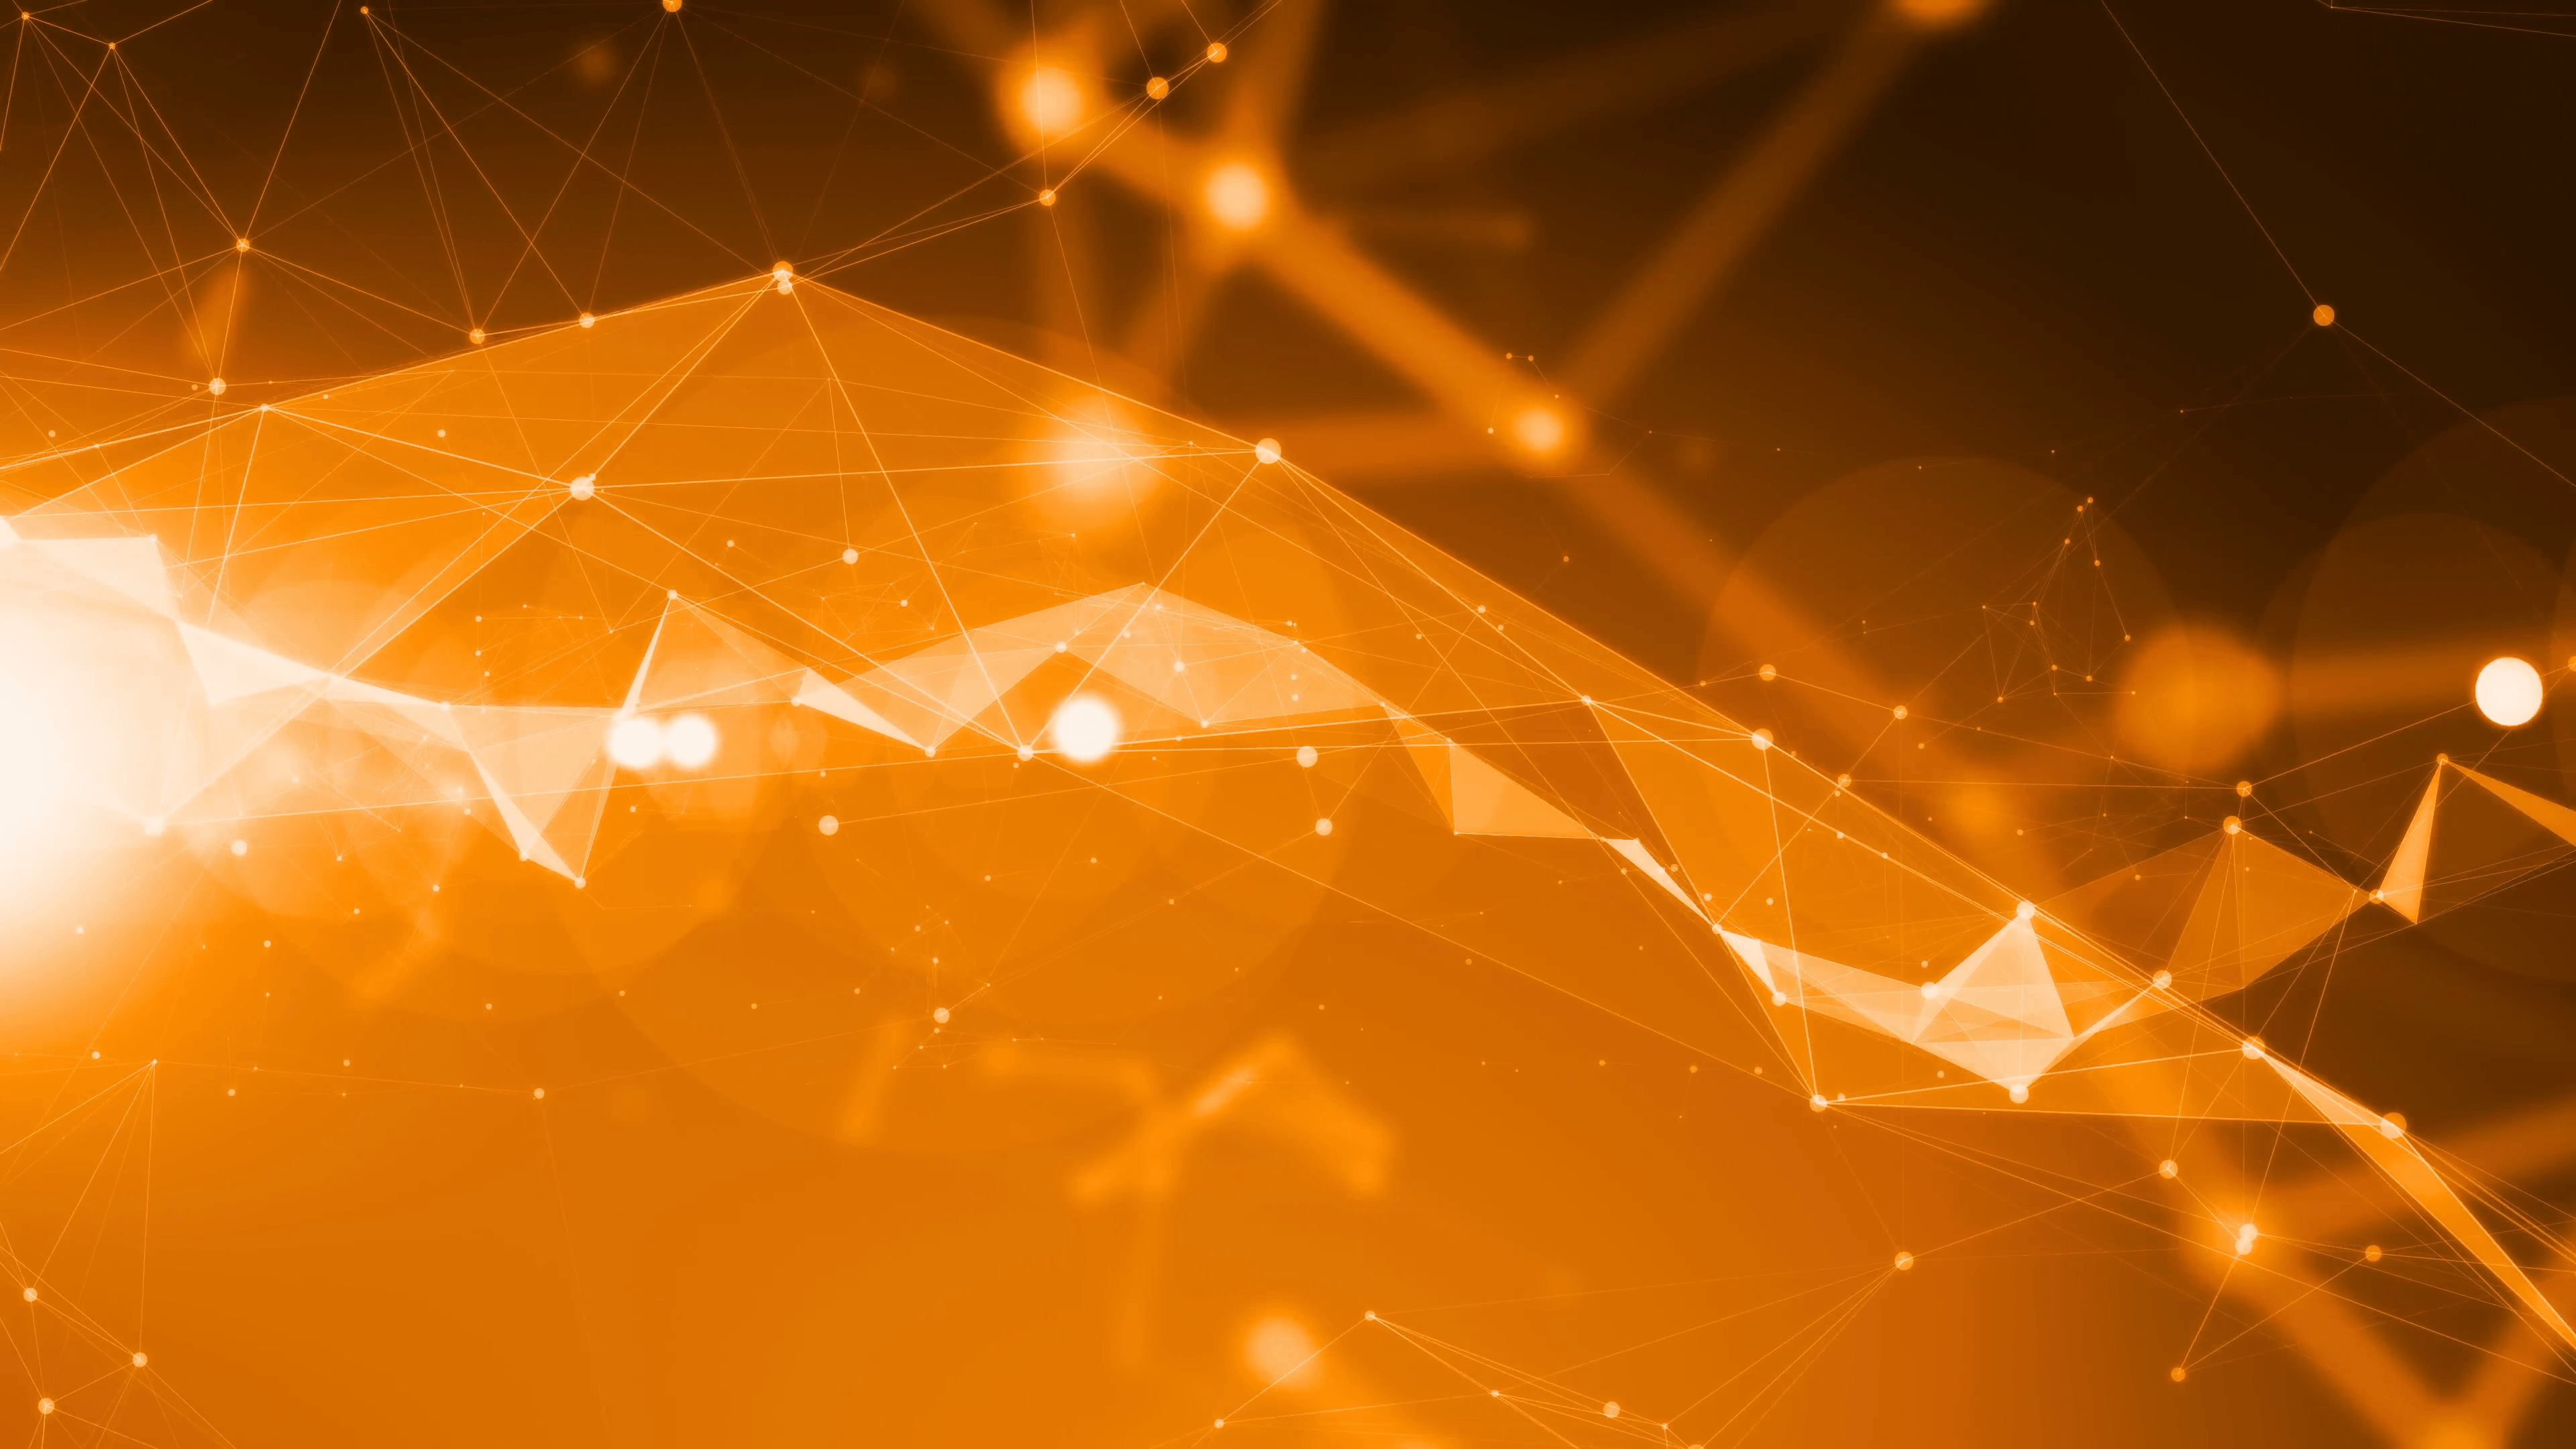 4k Technology Abstract Animation Background Seamless Loop. Orange